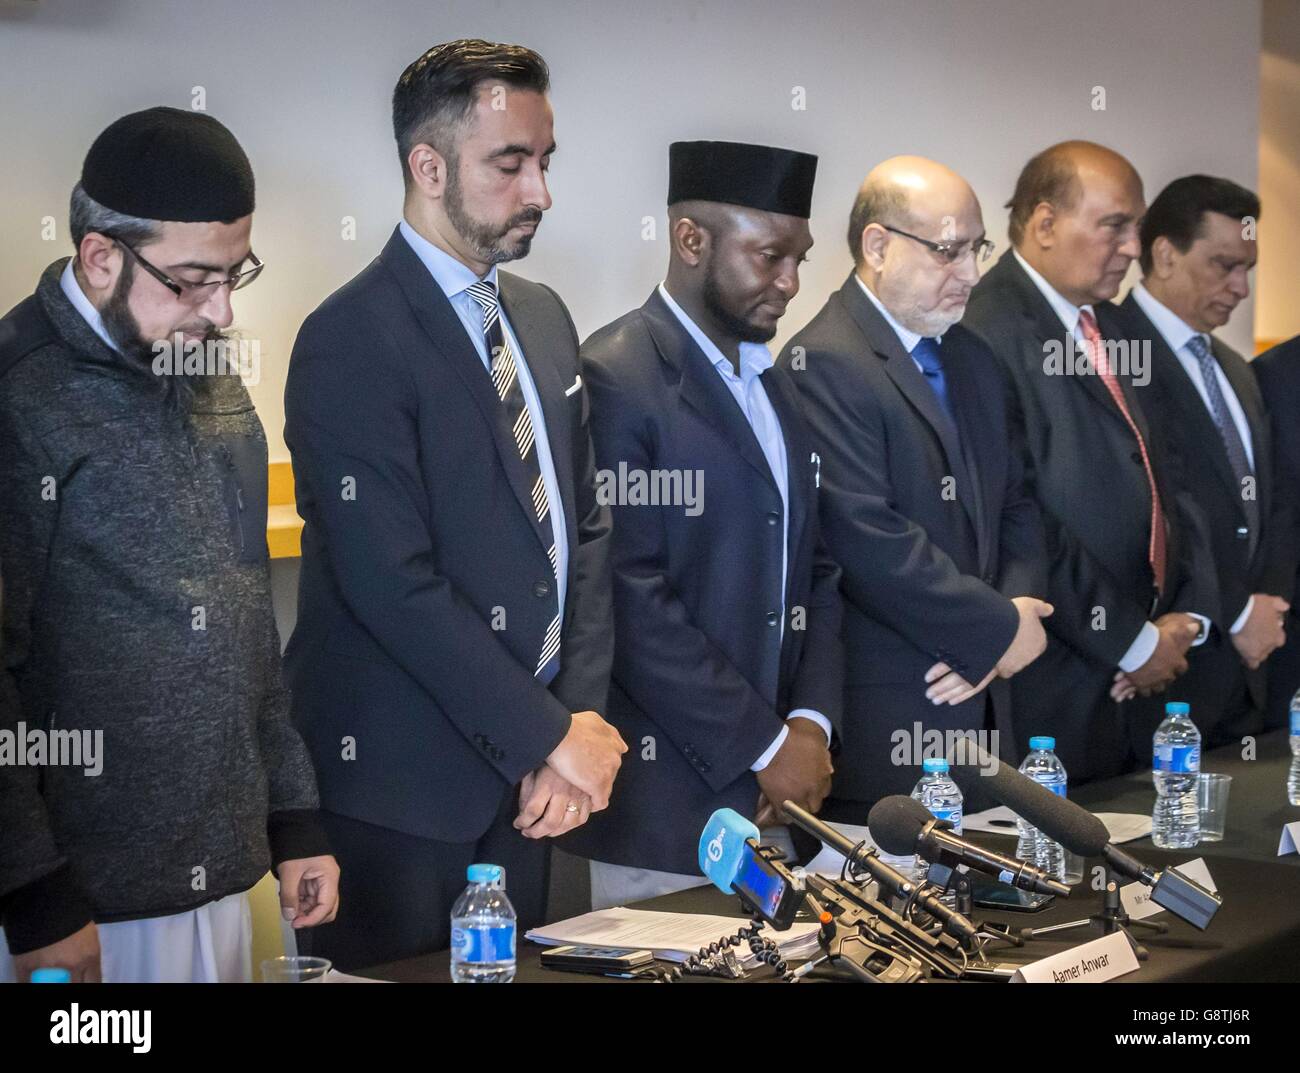 (Left to centre) Glasgow Central Mosque imam Habib ur Rehman, lawyer Aamer Anwar and Ahmed Owusu-Konadu, a member of the Ahmadiyya Muslim community, take part in a minute's silence during a press conference at Hampden Park in Glasgow to condemn the recent terror attacks around the world and death of shopkeeper Asad Shah in Glasgow. Stock Photo